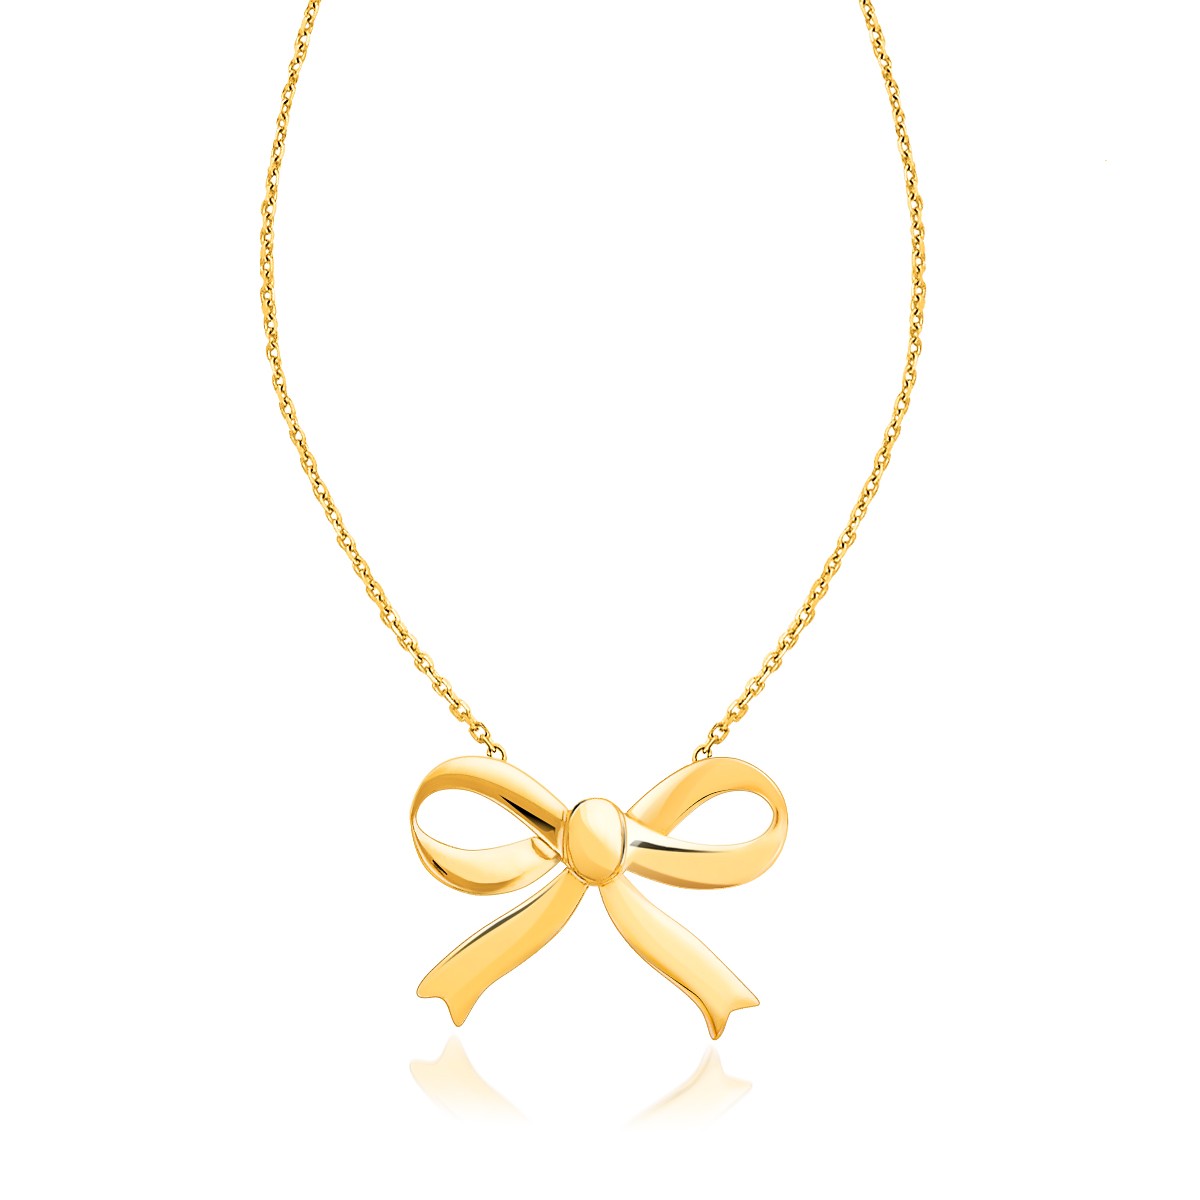 Bow Necklace In 14k Yellow Gold Richard Cannon Jewelry